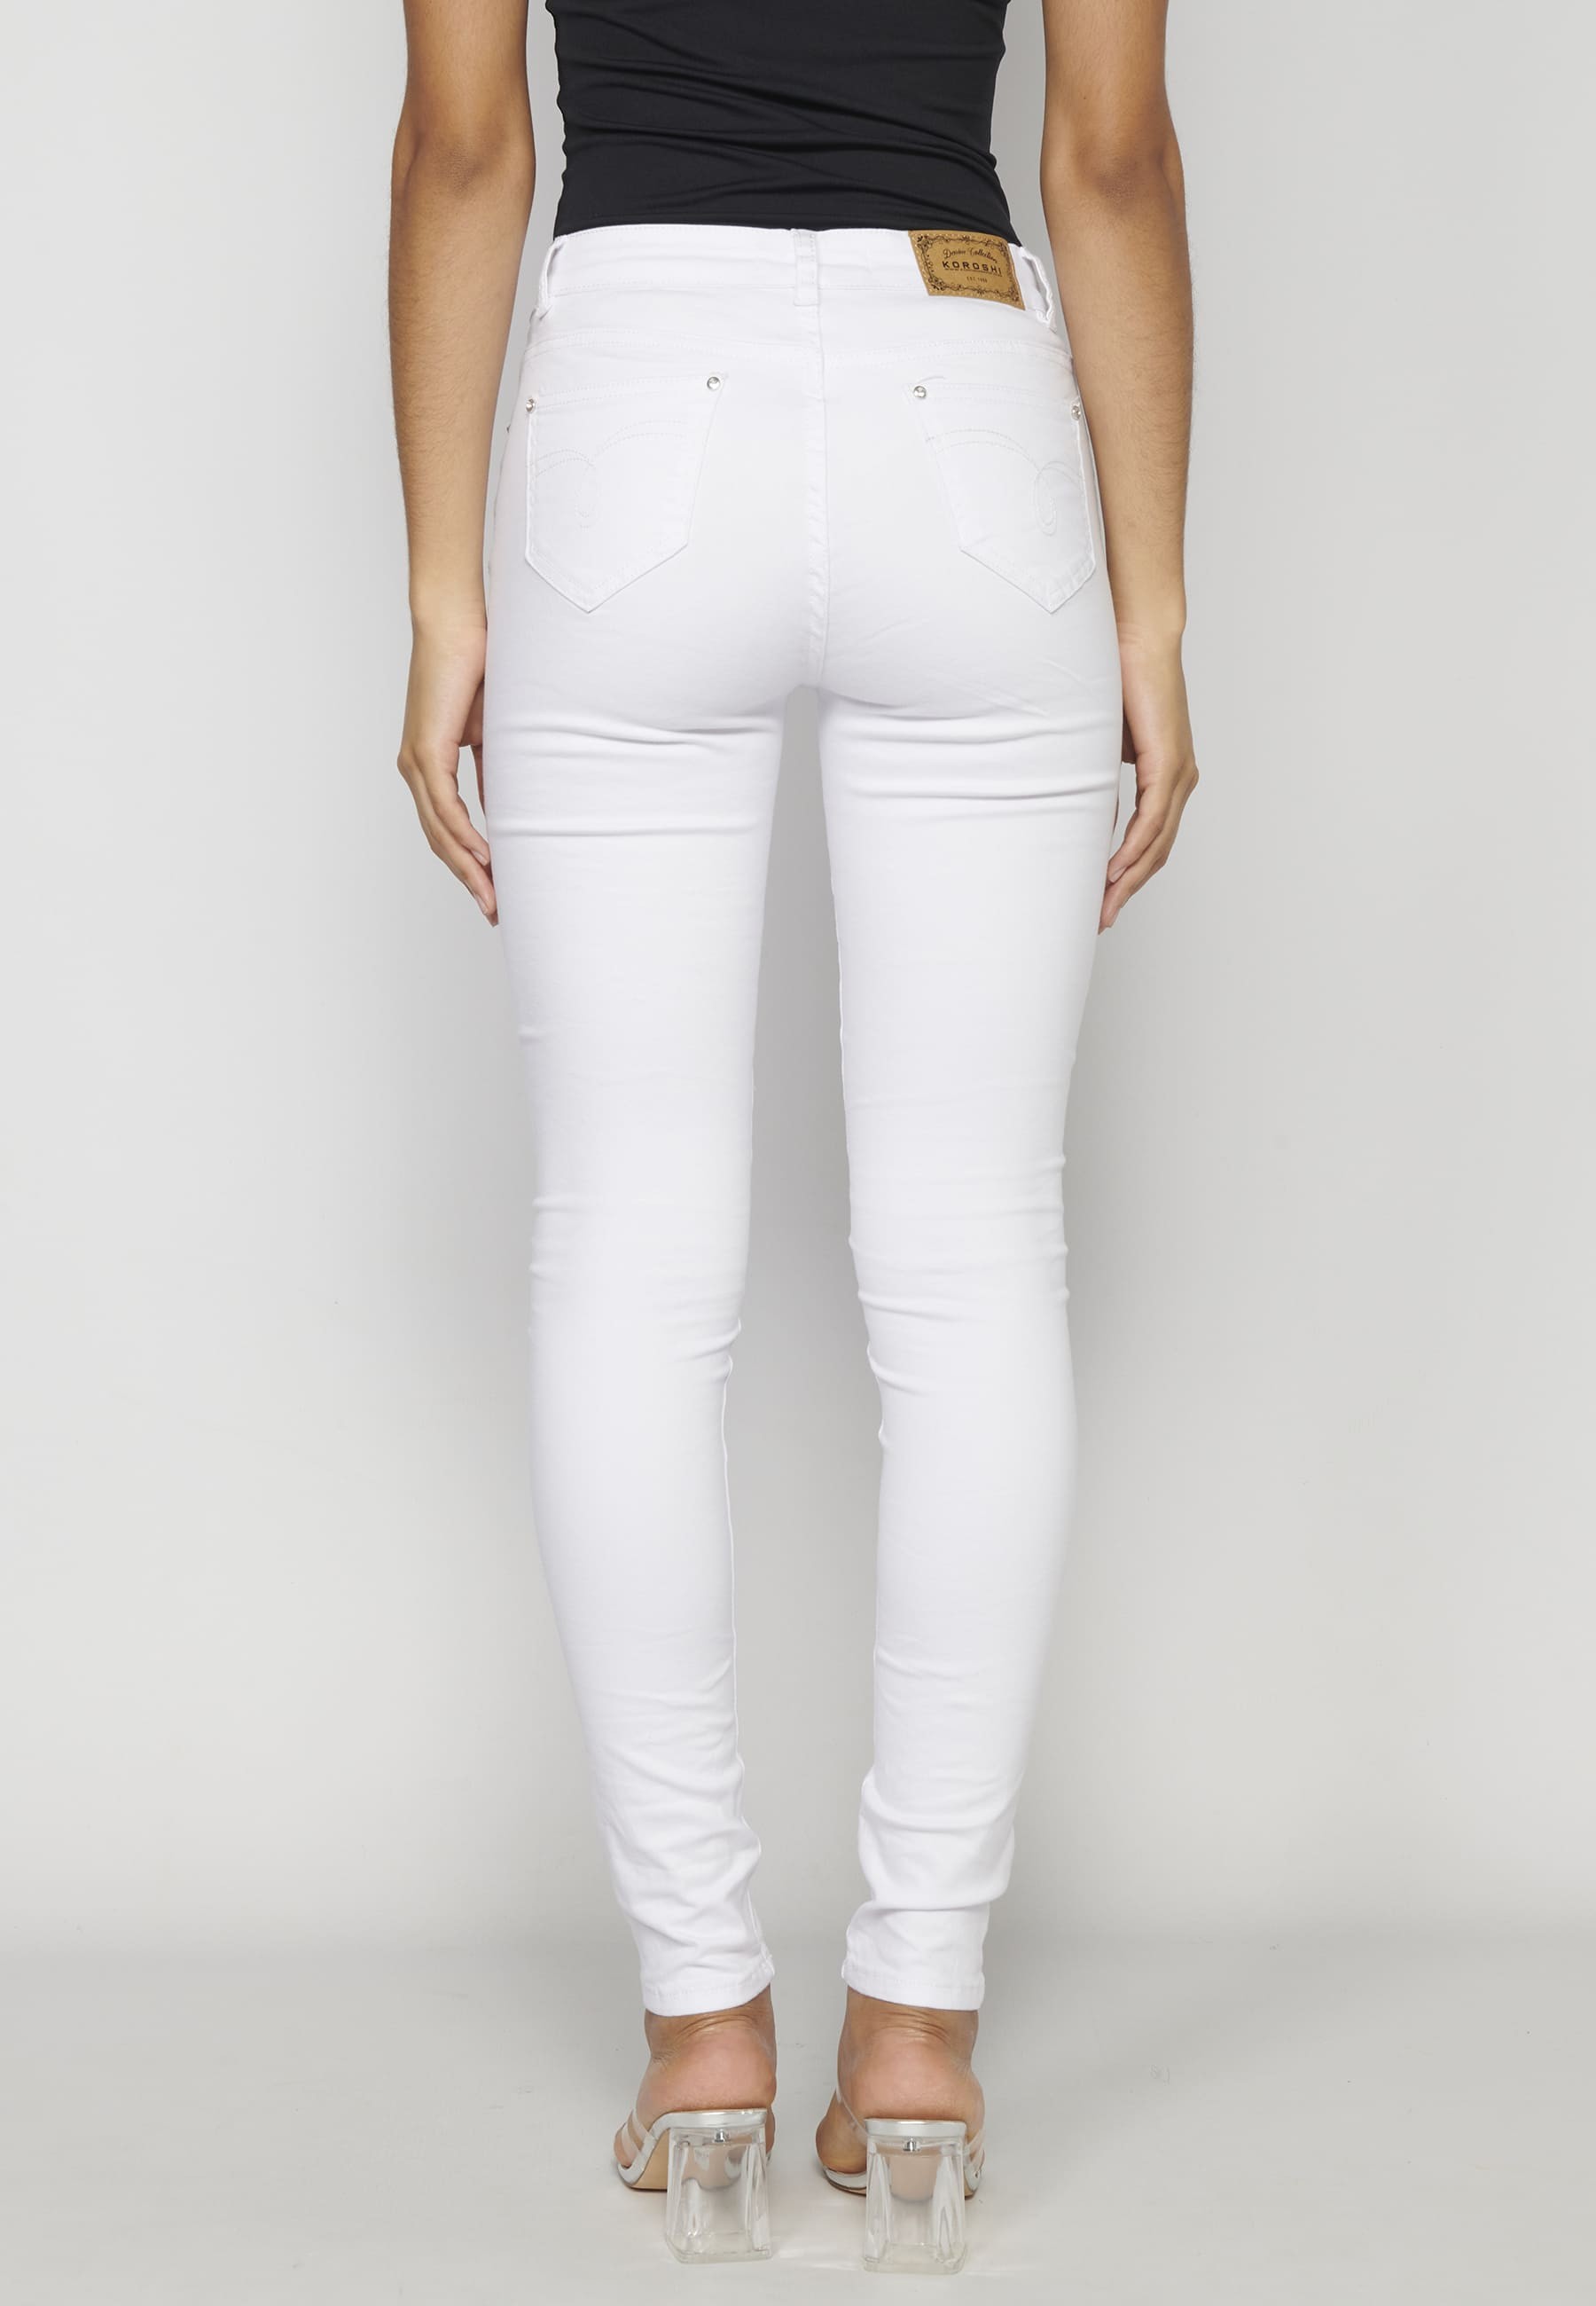 Long slim-fit jeans in White color for Woman